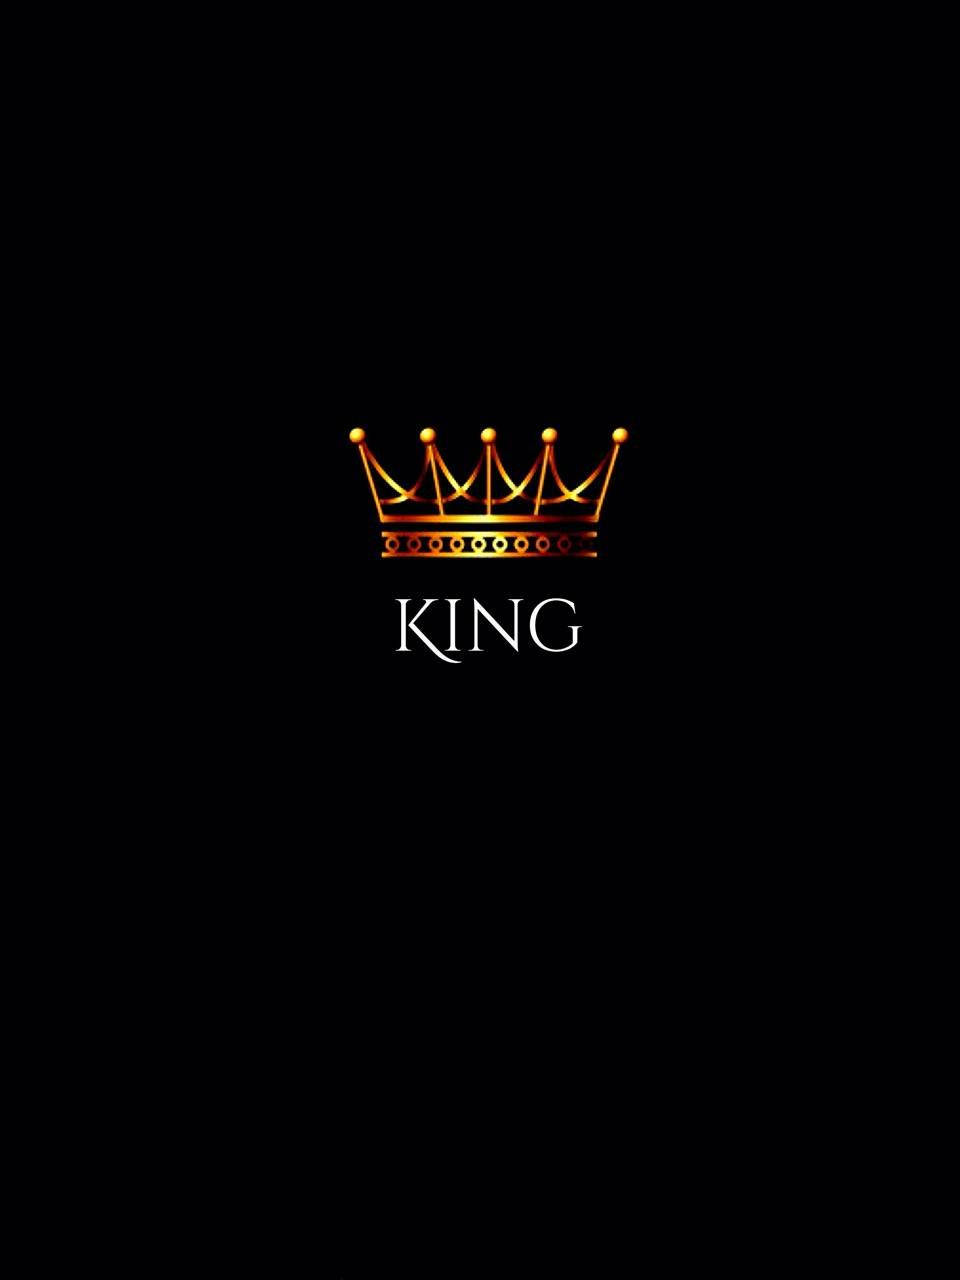 Black King Calligraphy With Golden Crown Background